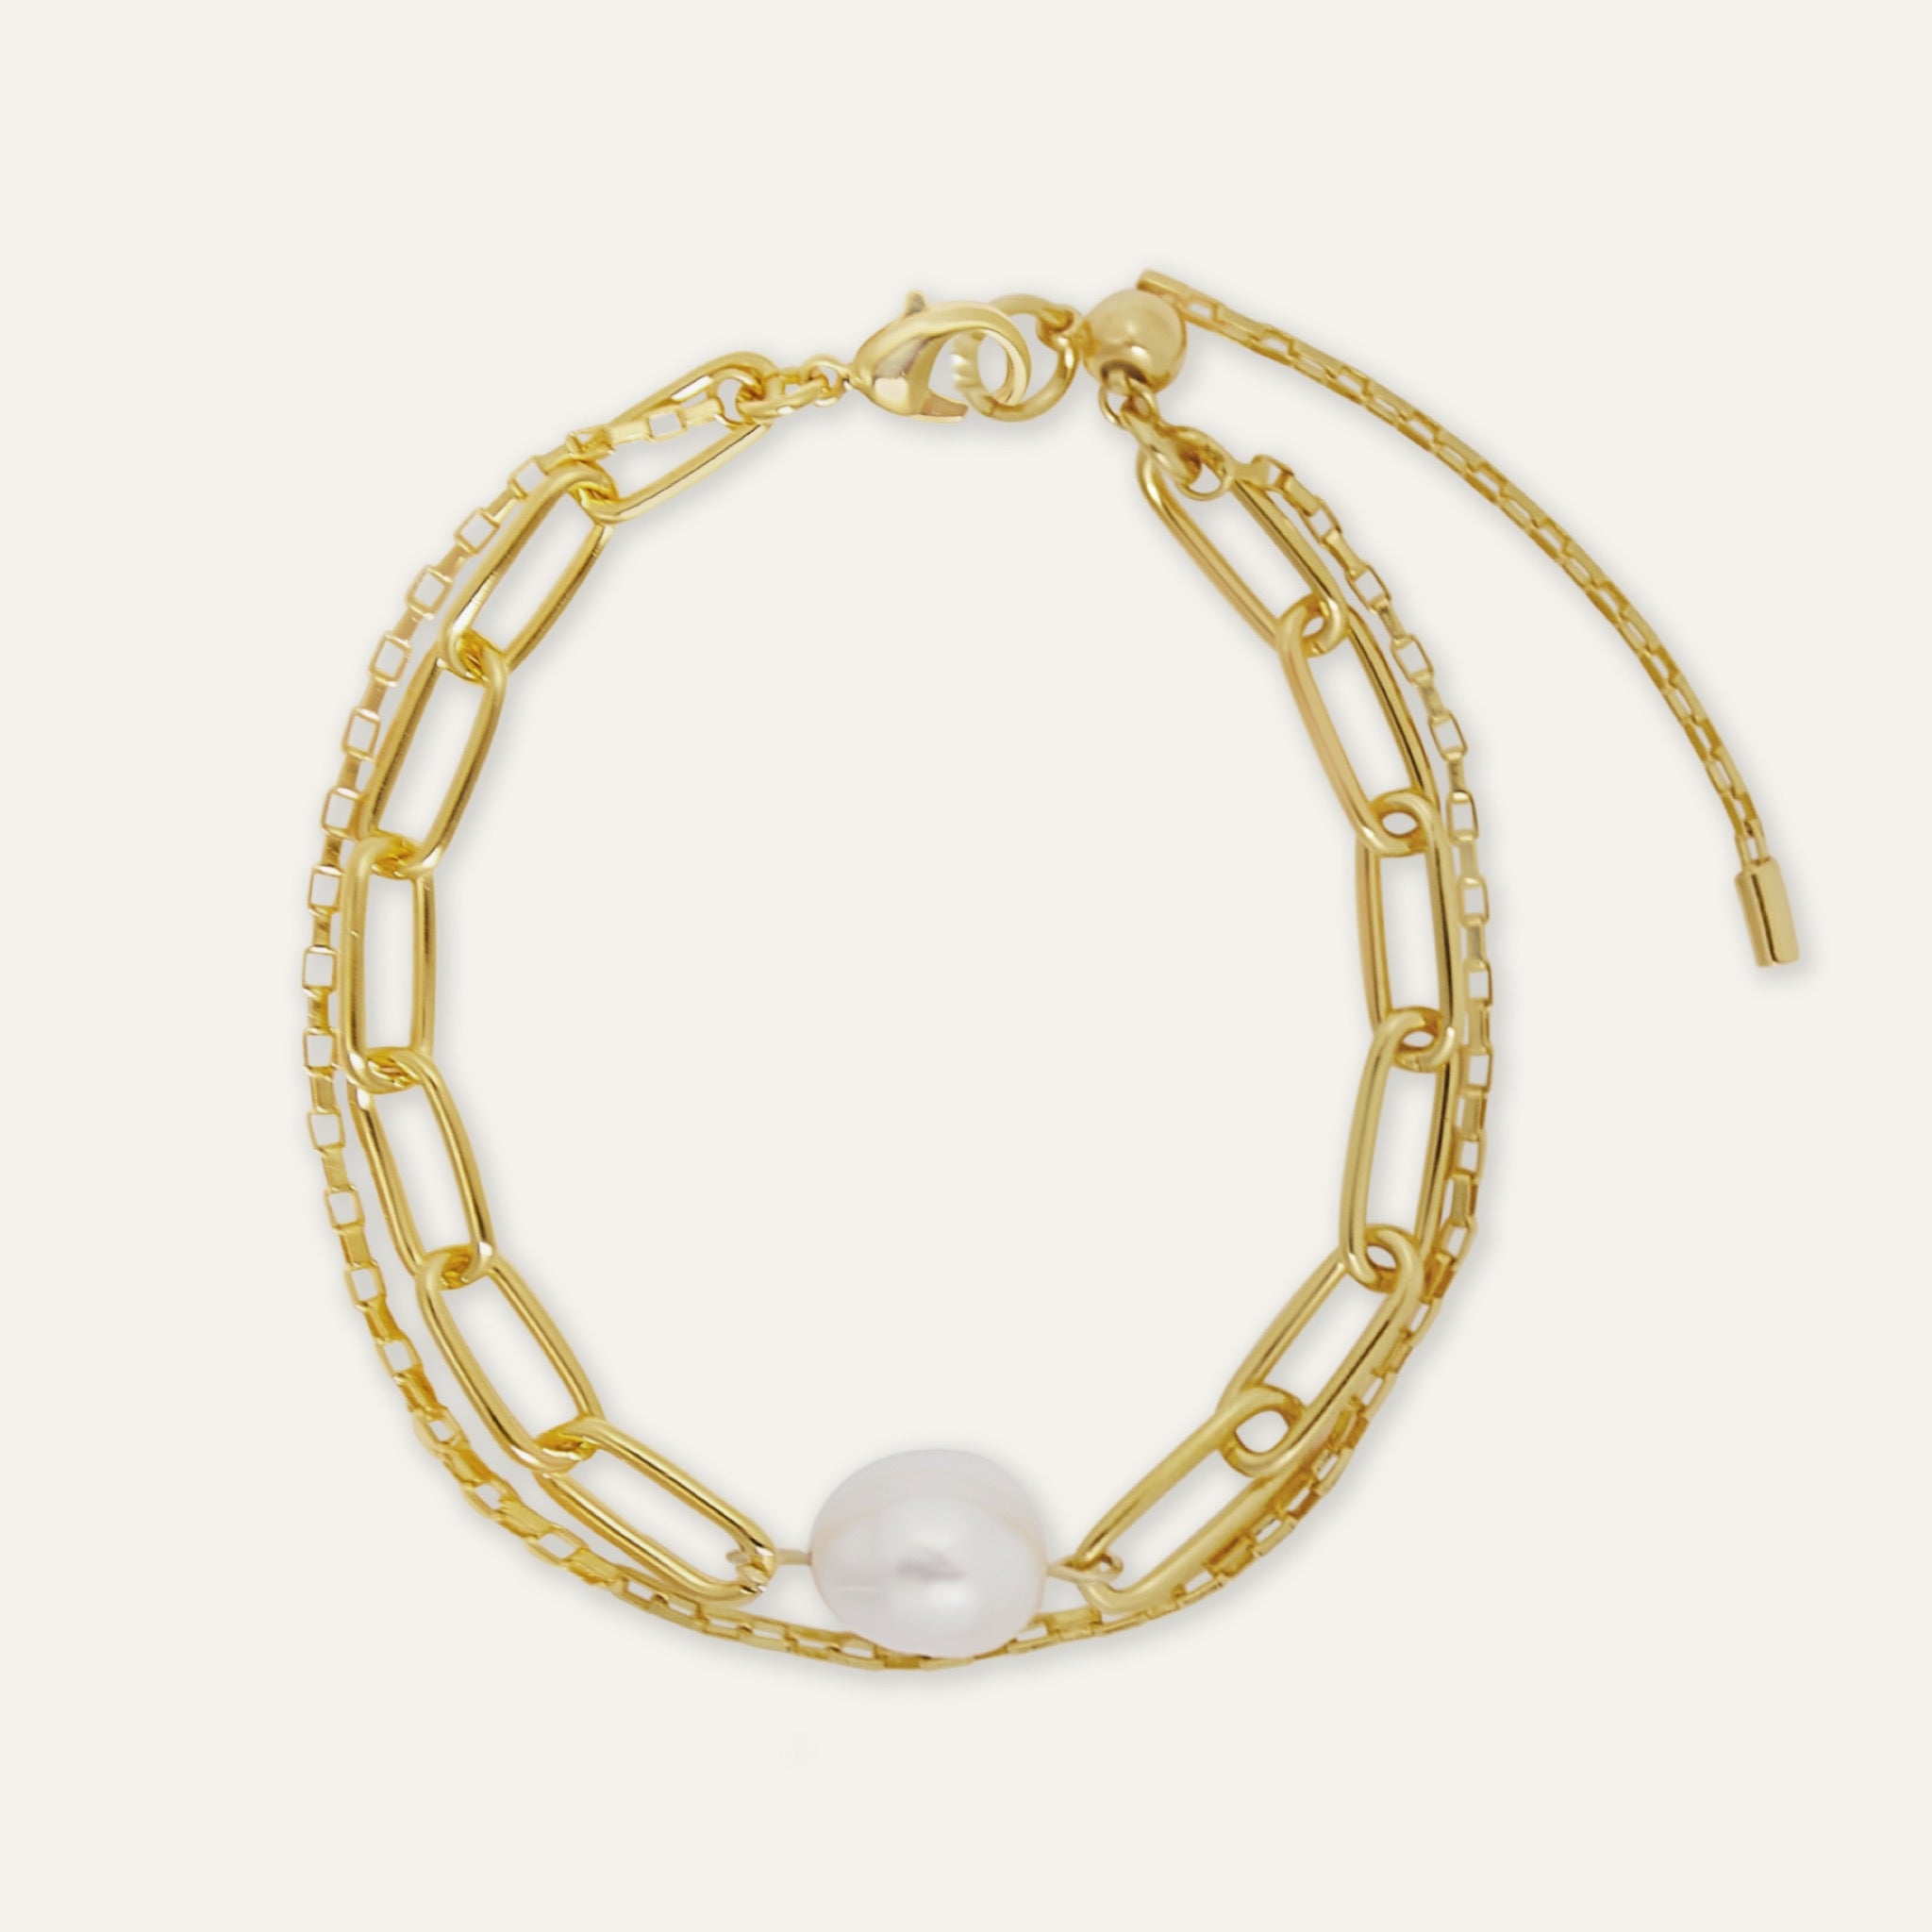 Lullaby Bracelet Plated in 14-18k Gold With Ocean Pearls